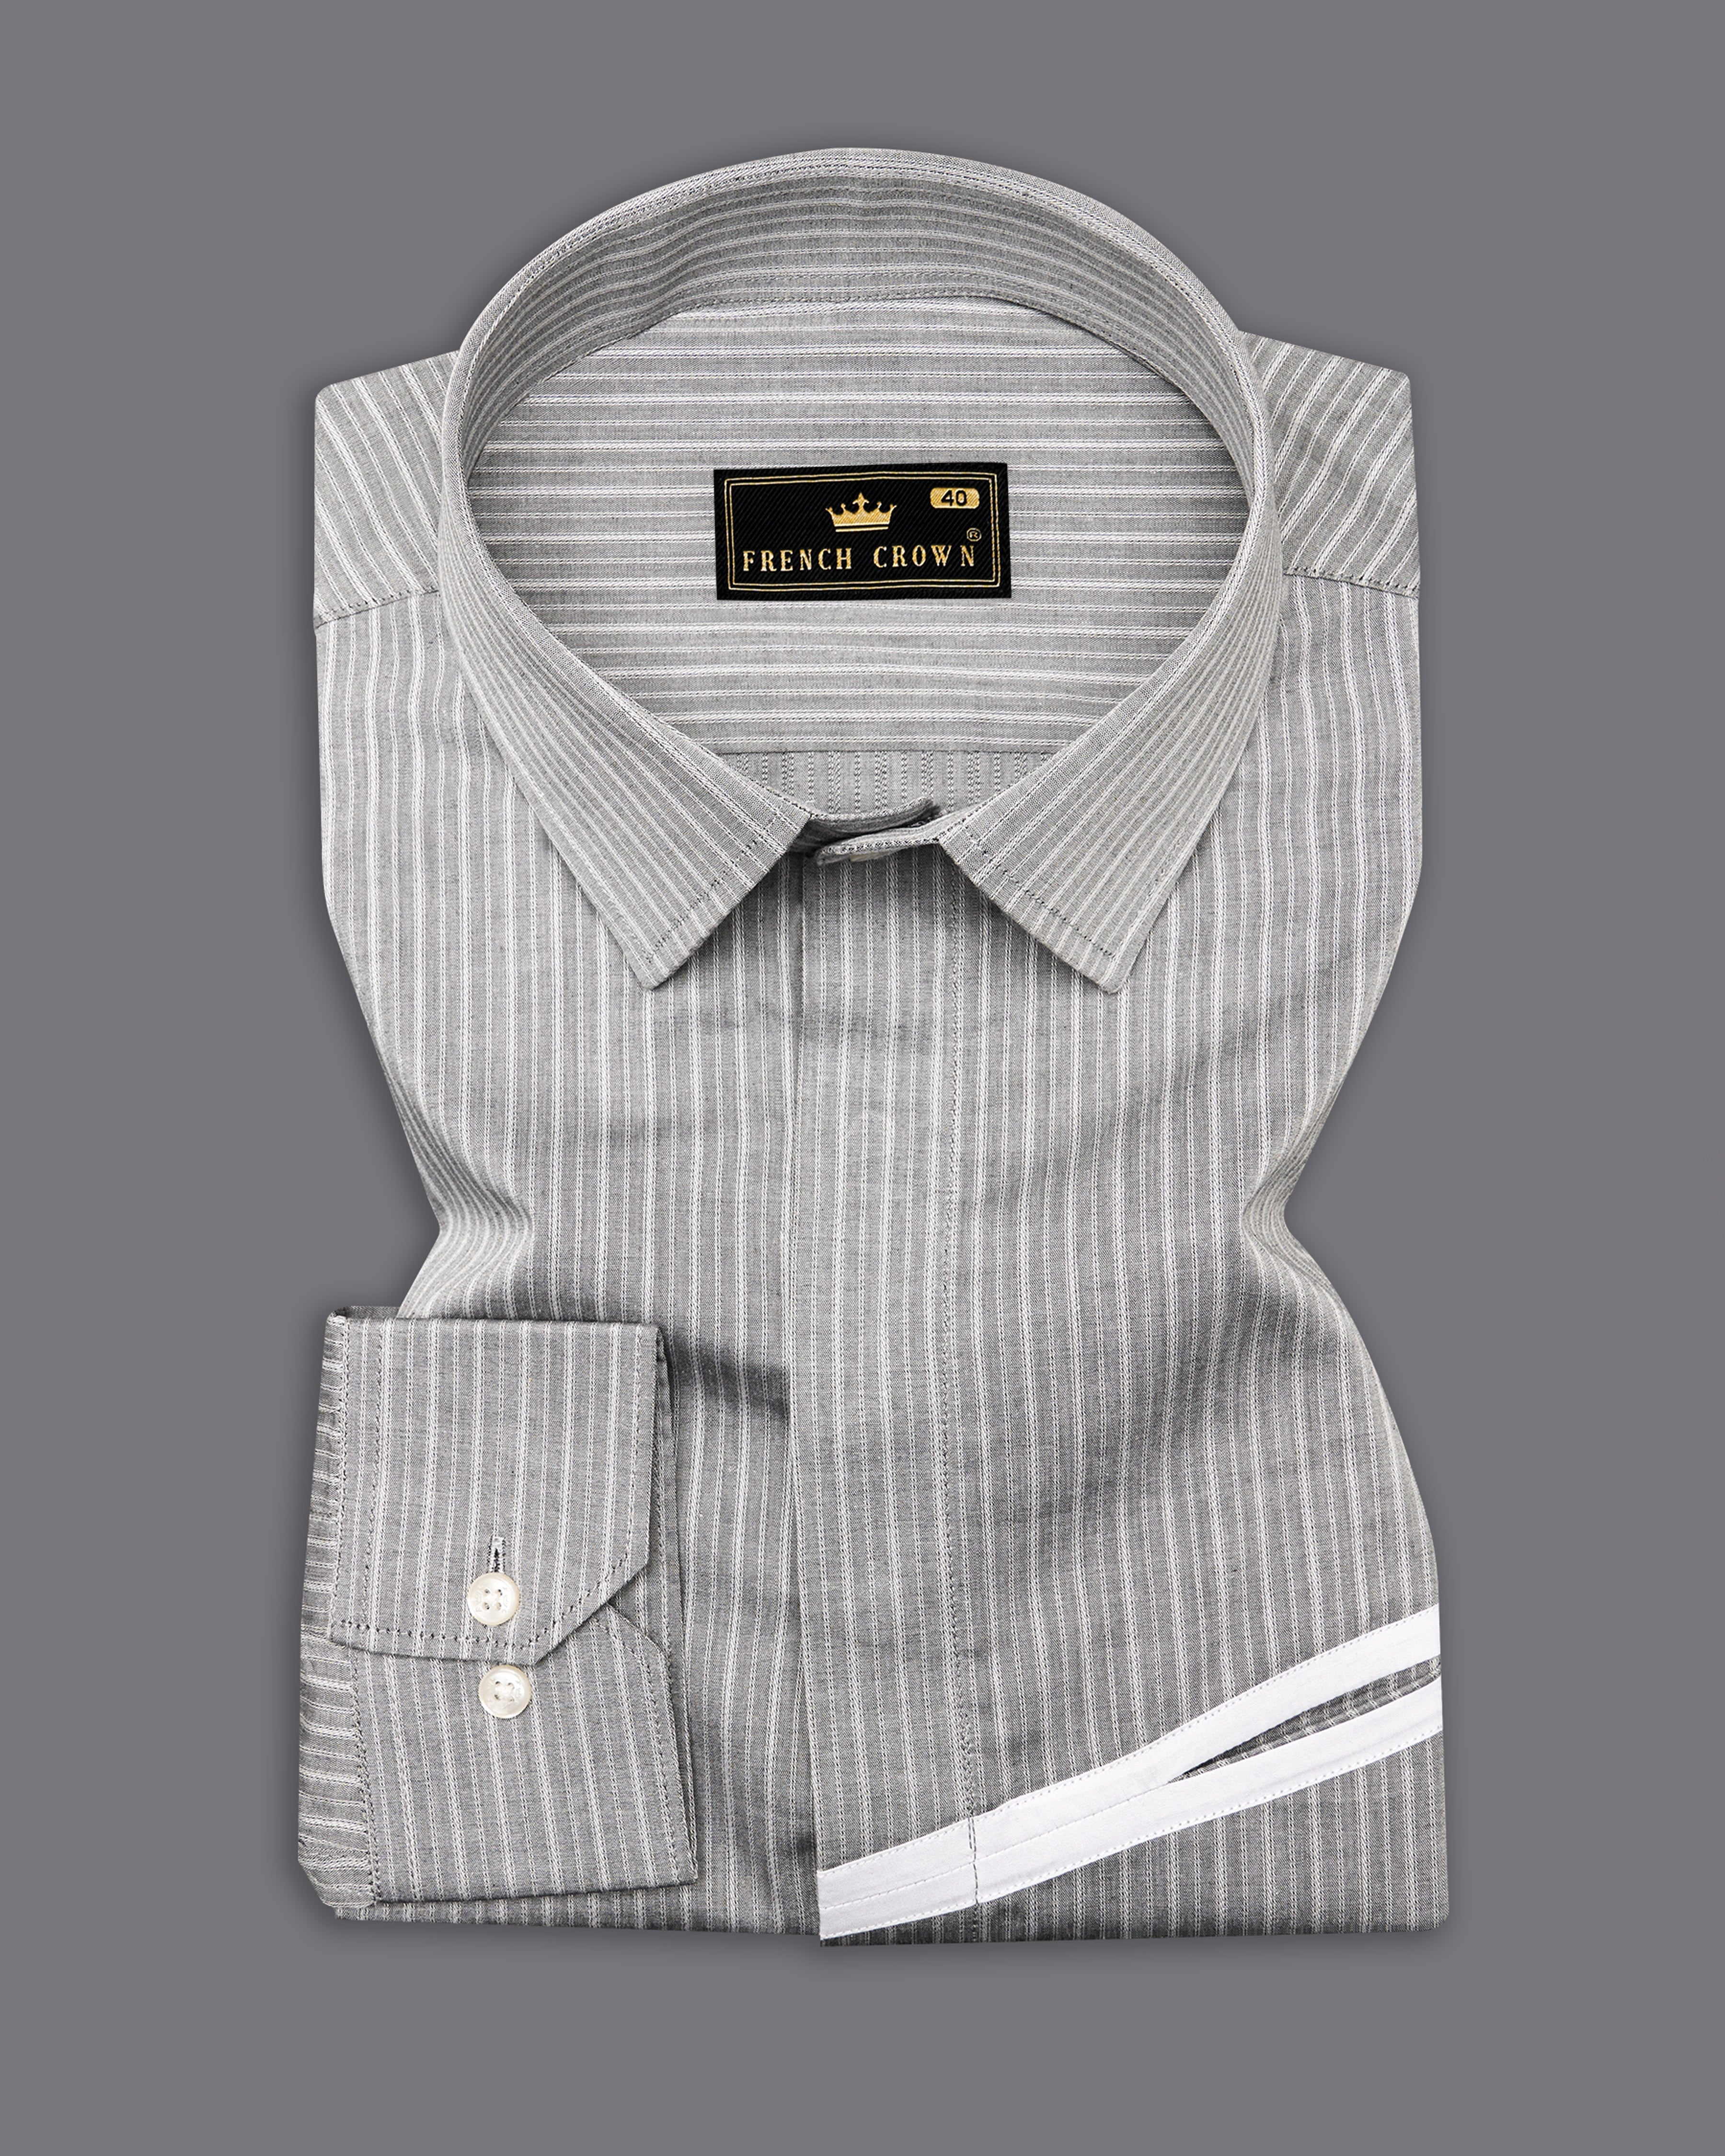 Martini Gray with Geyser Gray with White Patch Work Dobby Giza Cotton Shirt 9630-P232-38,9630-P232-H-38,9630-P232-39,9630-P232-H-39,9630-P232-40,9630-P232-H-40,9630-P232-42,9630-P232-H-42,9630-P232-44,9630-P232-H-44,9630-P232-46,9630-P232-H-46,9630-P232-48,9630-P232-H-48,9630-P232-50,9630-P232-H-50,9630-P232-52,9630-P232-H-52